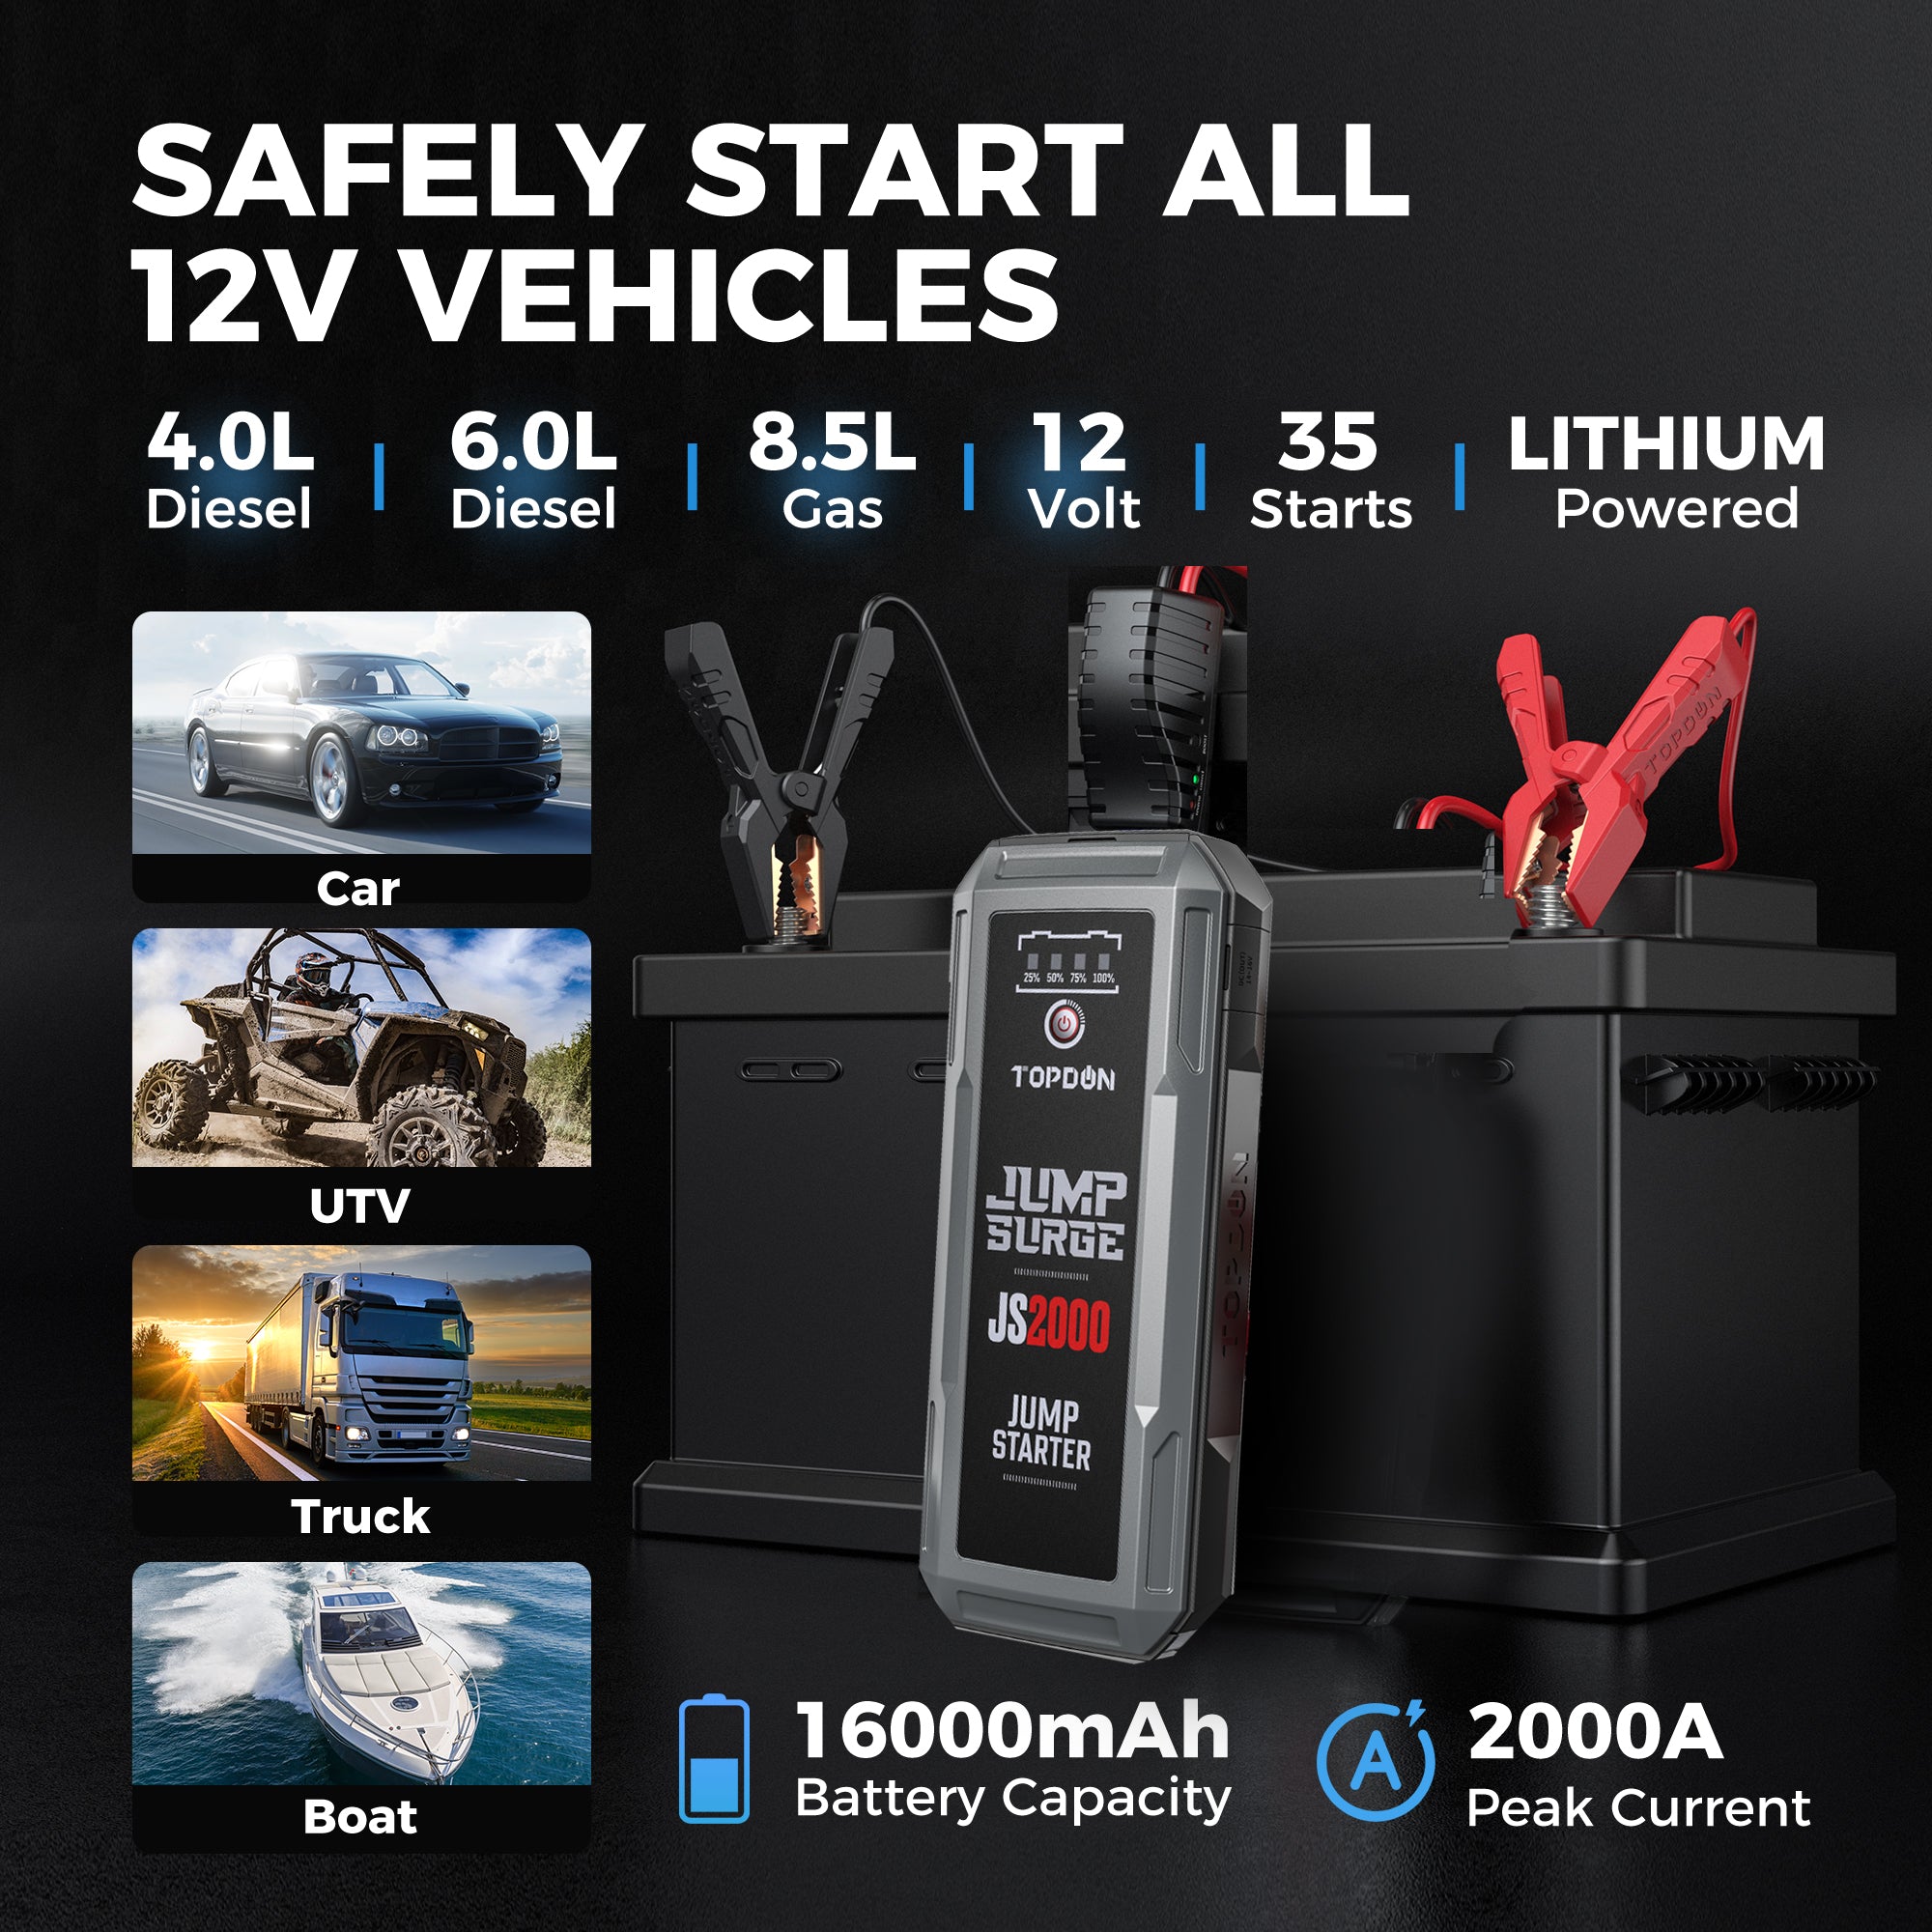  Car Battery Jump Starter, TOPDON 2000A Peak Battery Jump  Starter for Up to 8L Gas/6L Diesel Engines, 12V Portable Battery Booster  Jump Starter Pack with Jumper Cables and EVA Protection Case 